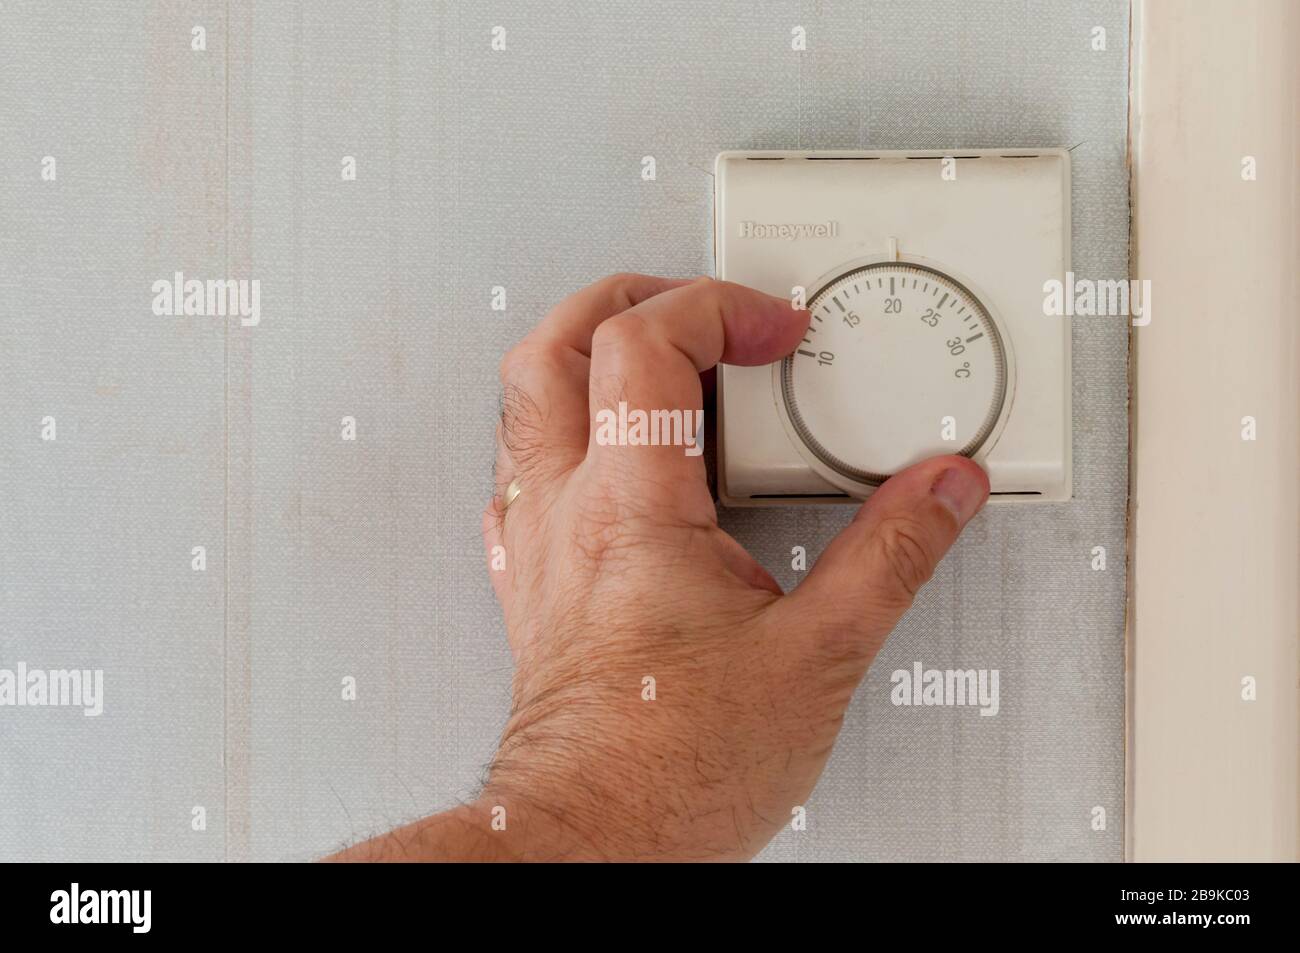 Male hand adjusting a central heating room thermostat. Stock Photo